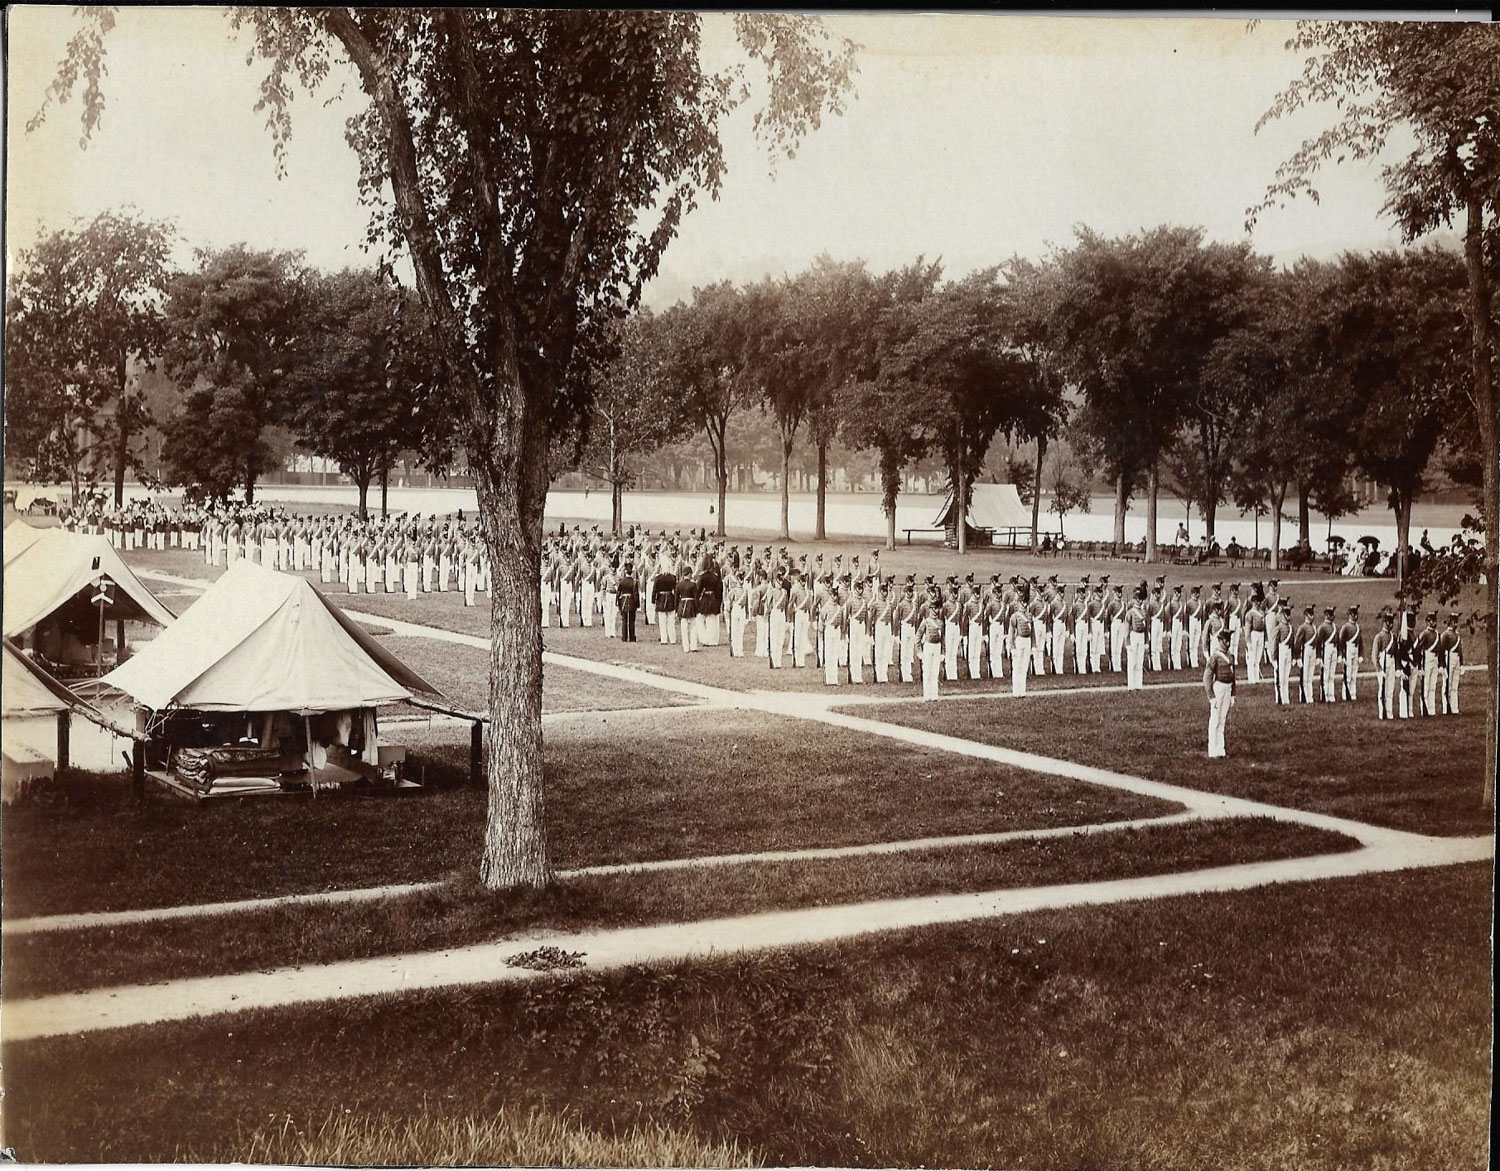 West Point Cadets in Formation